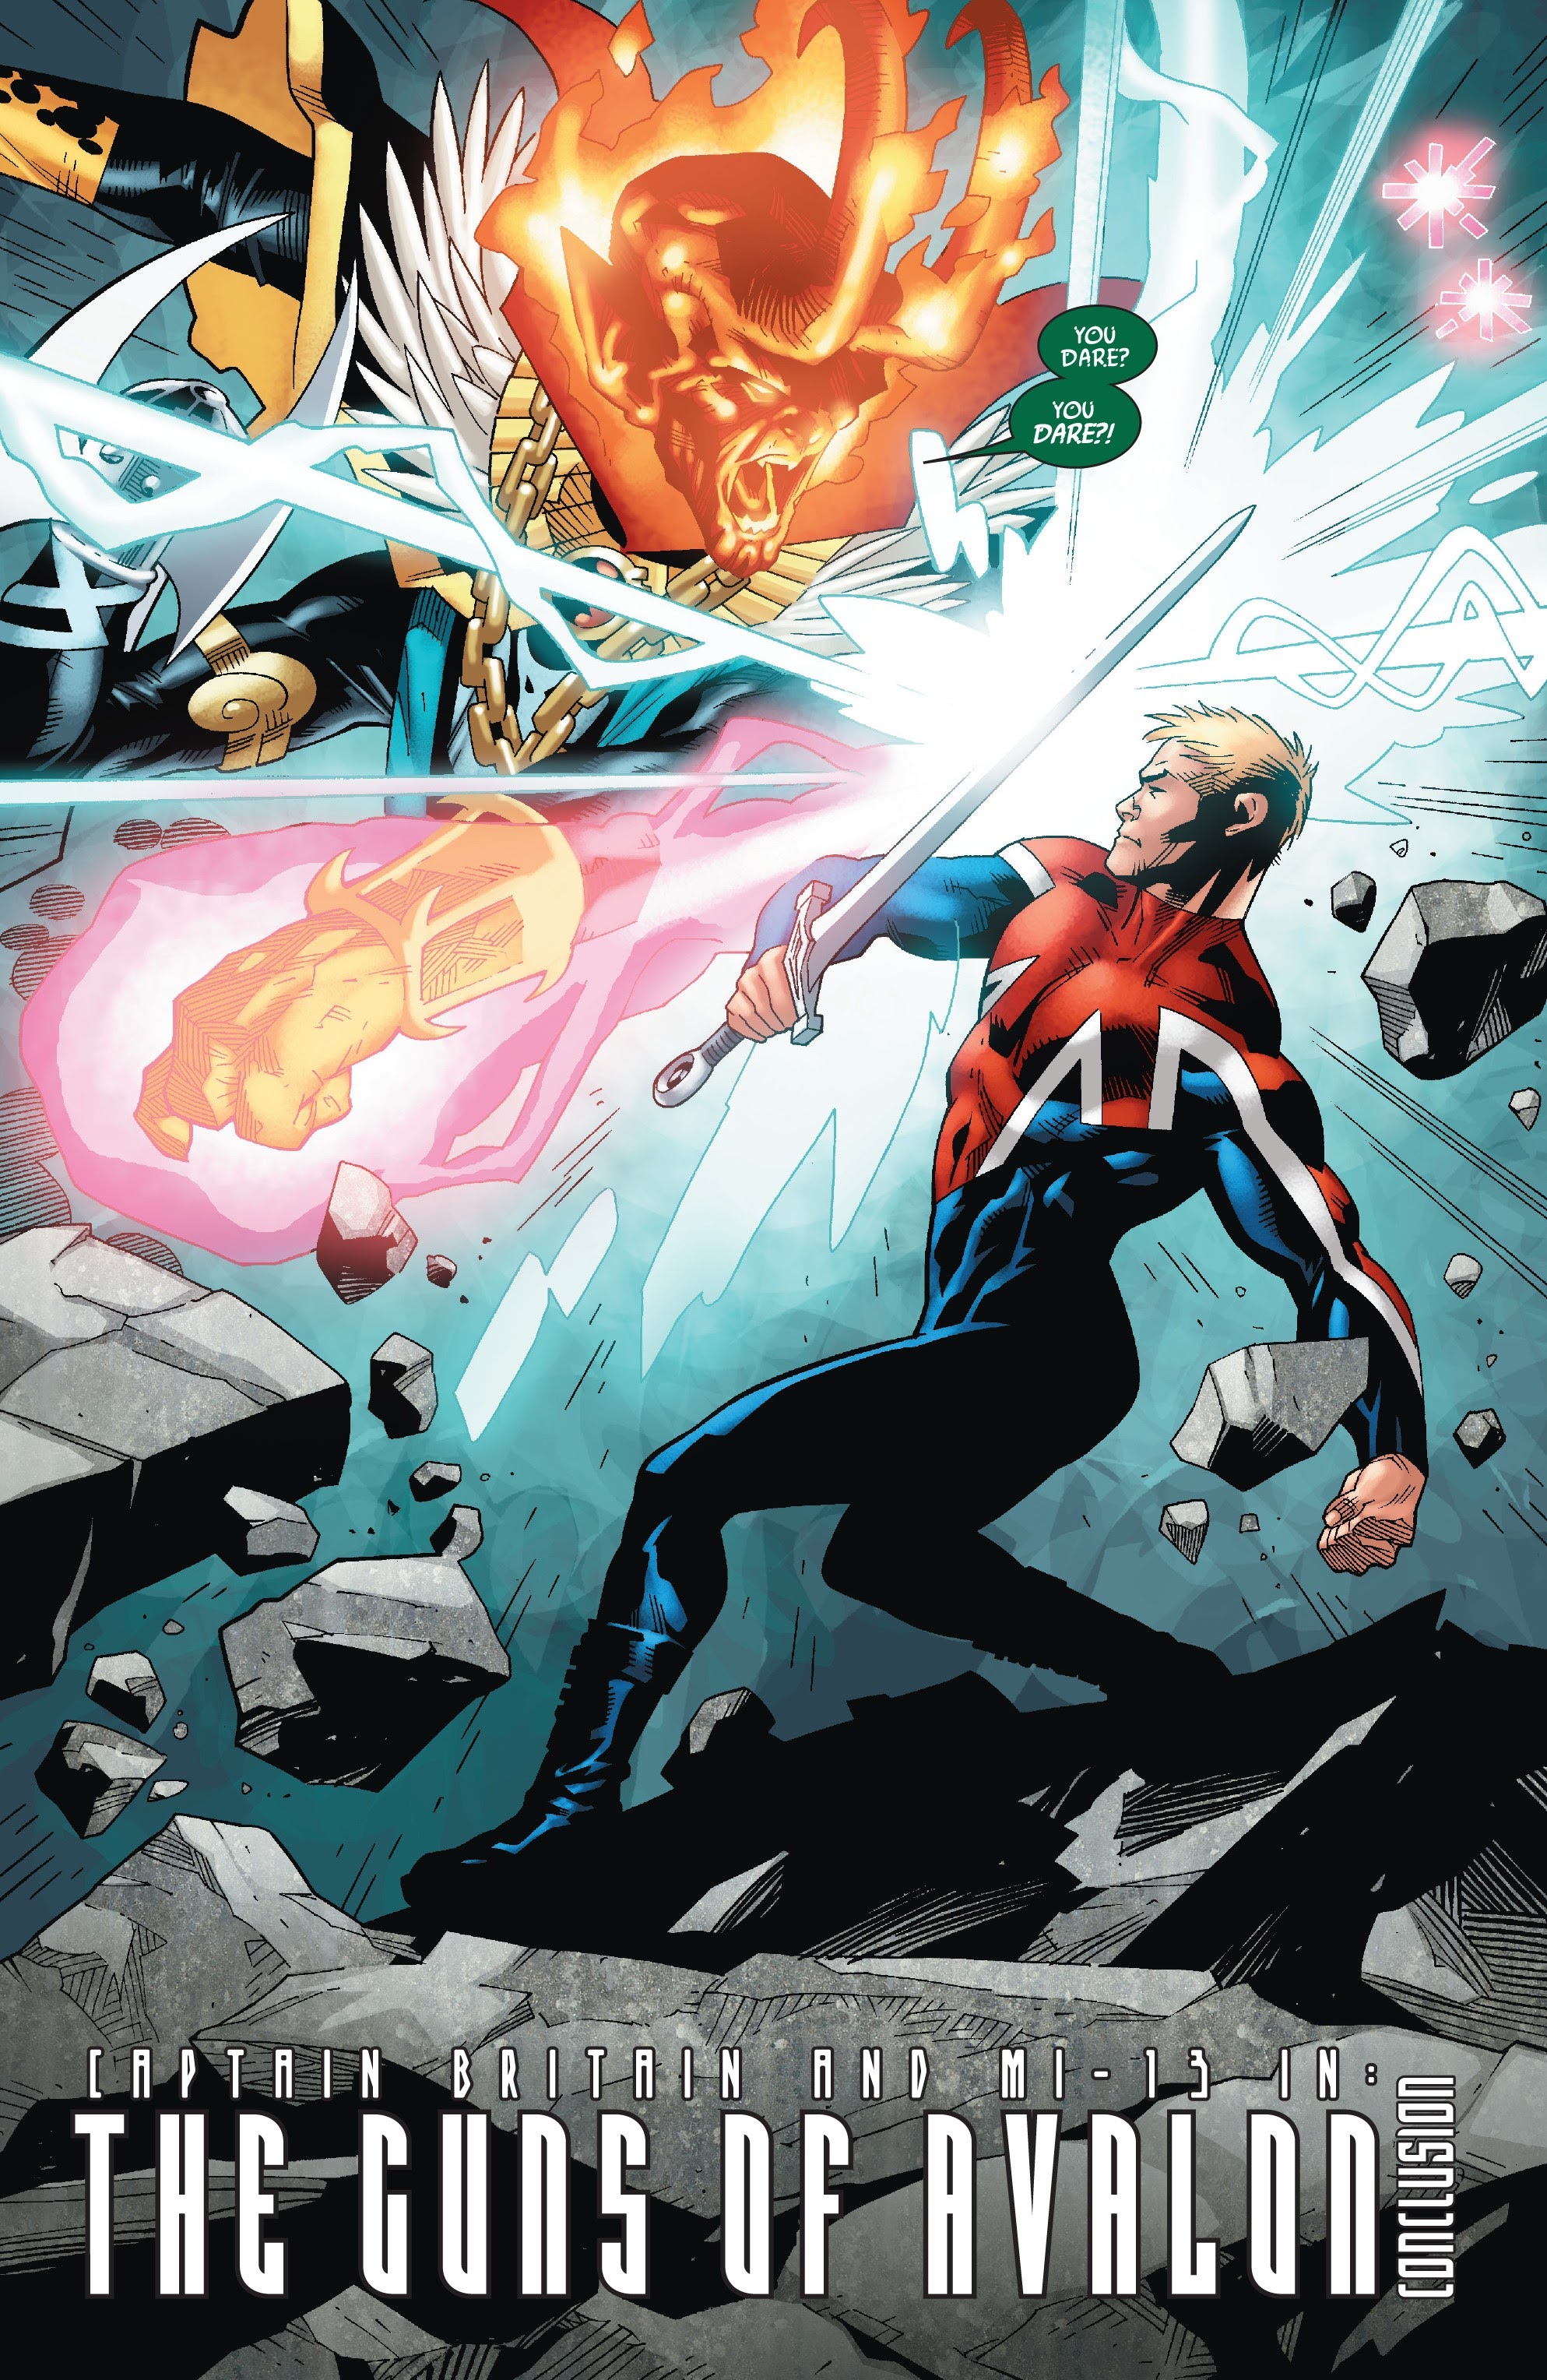 Captain Britain And Mi13 Issue 4 | Read Captain Britain And Mi13 Issue 4  comic online in high quality. Read Full Comic online for free - Read comics  online in high quality .